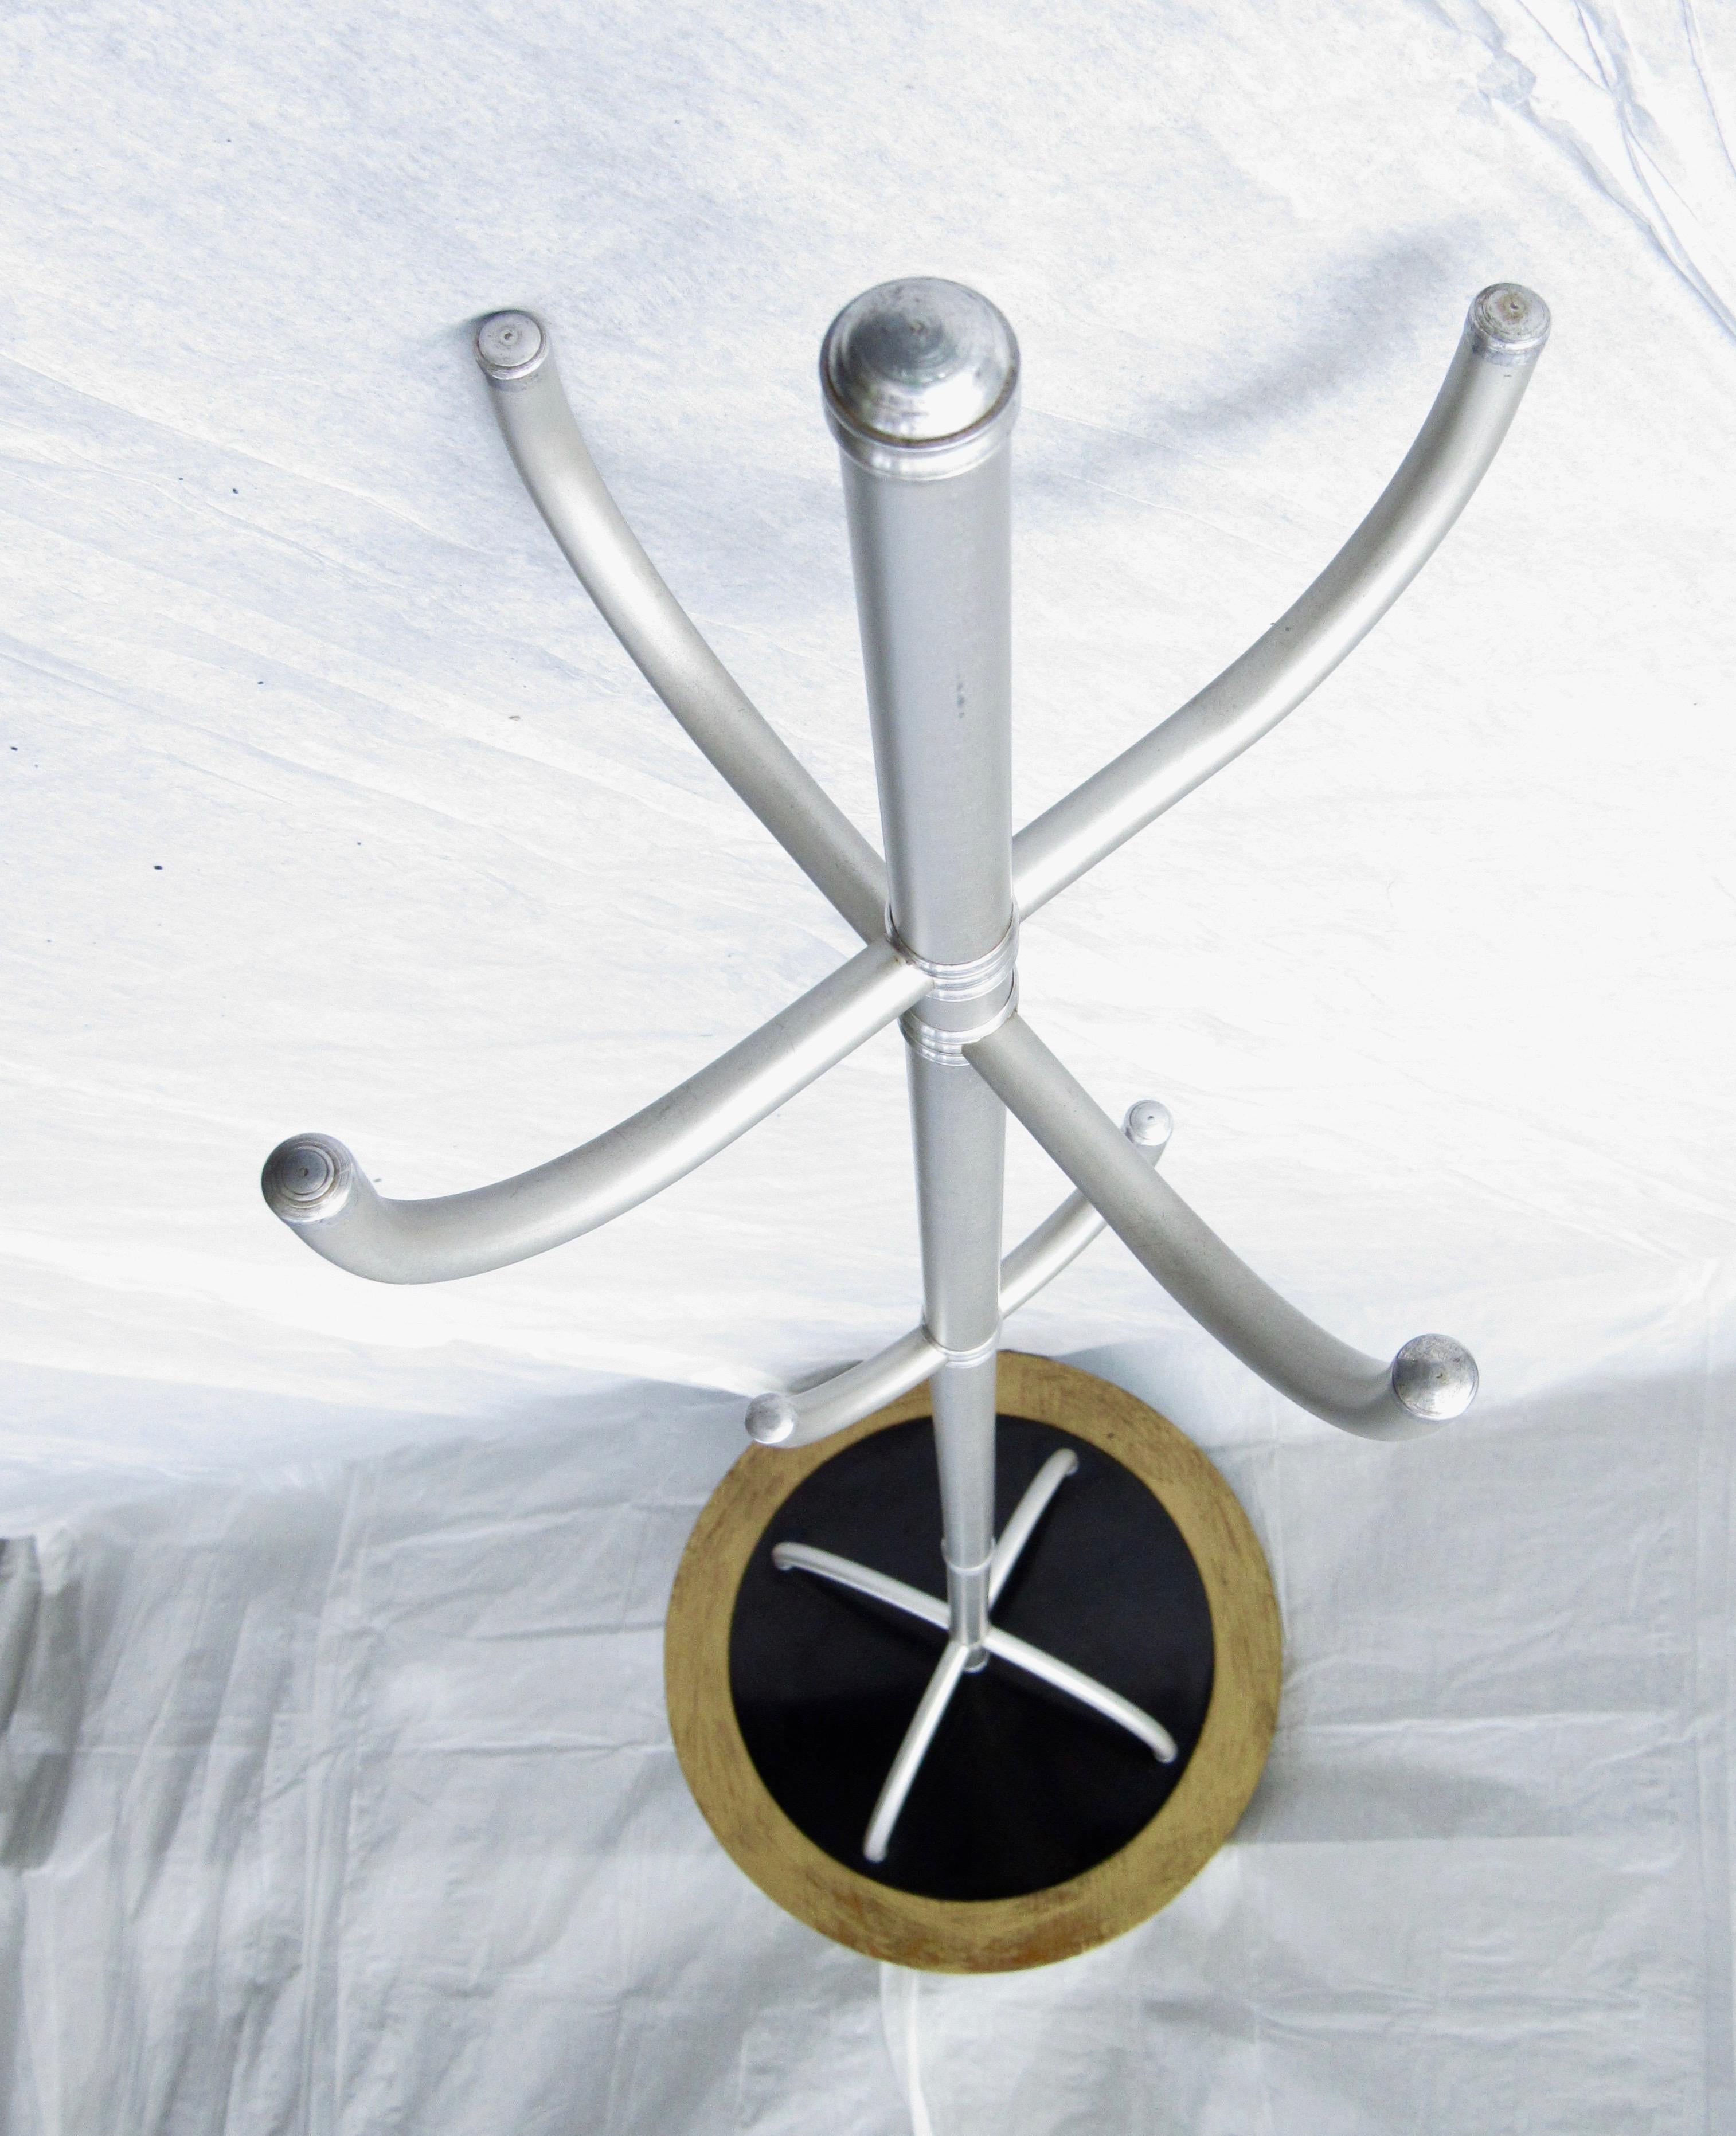 A Warren McArthur coat hat rack designed for the Arizona Biltmore and manufactured at the Warren McArthur Furniture Co. in Los Angeles, CA.
This is an early design with a center tube and 4 arched supports reflected in and attached to a black Formica